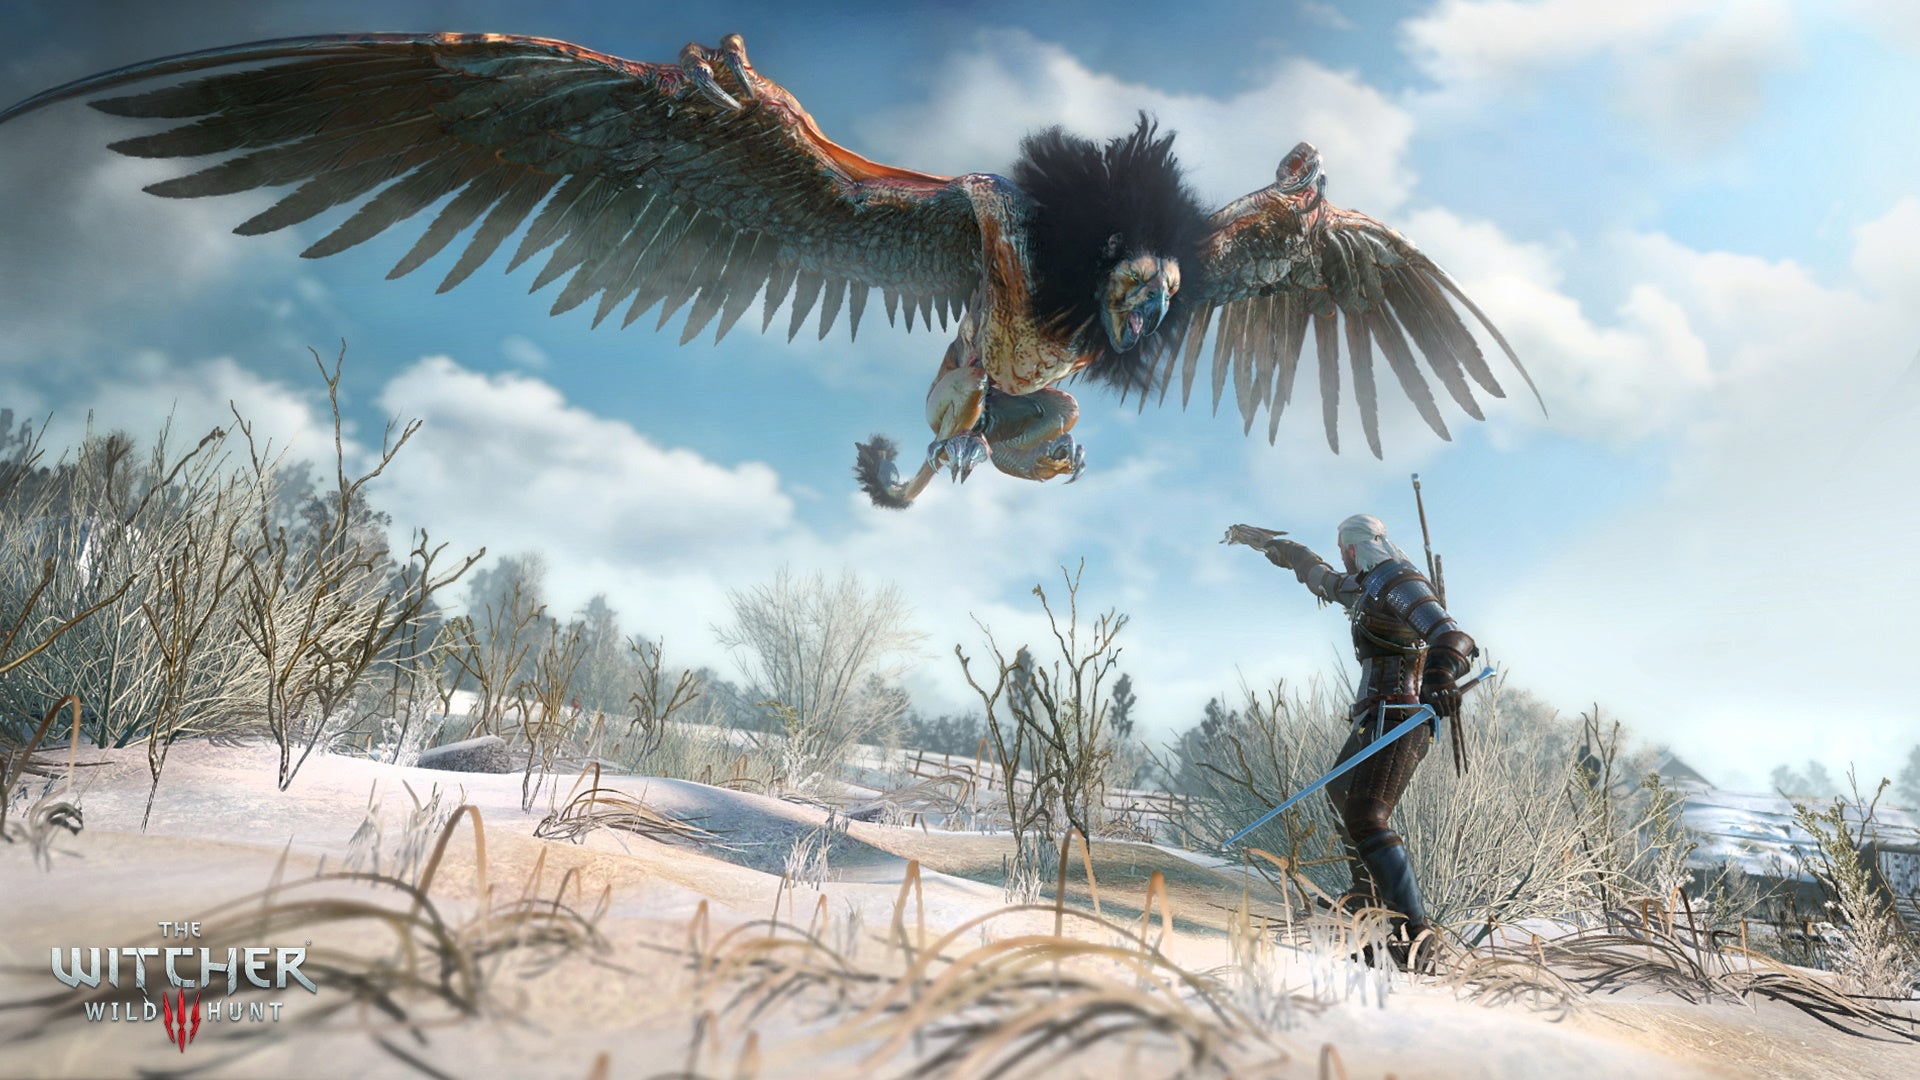 The Witcher 3 death's bed and swallow potion: A large brown winged beast with a lion's tale approaches a man wearing black armor. The man is pointing a crossbow at it